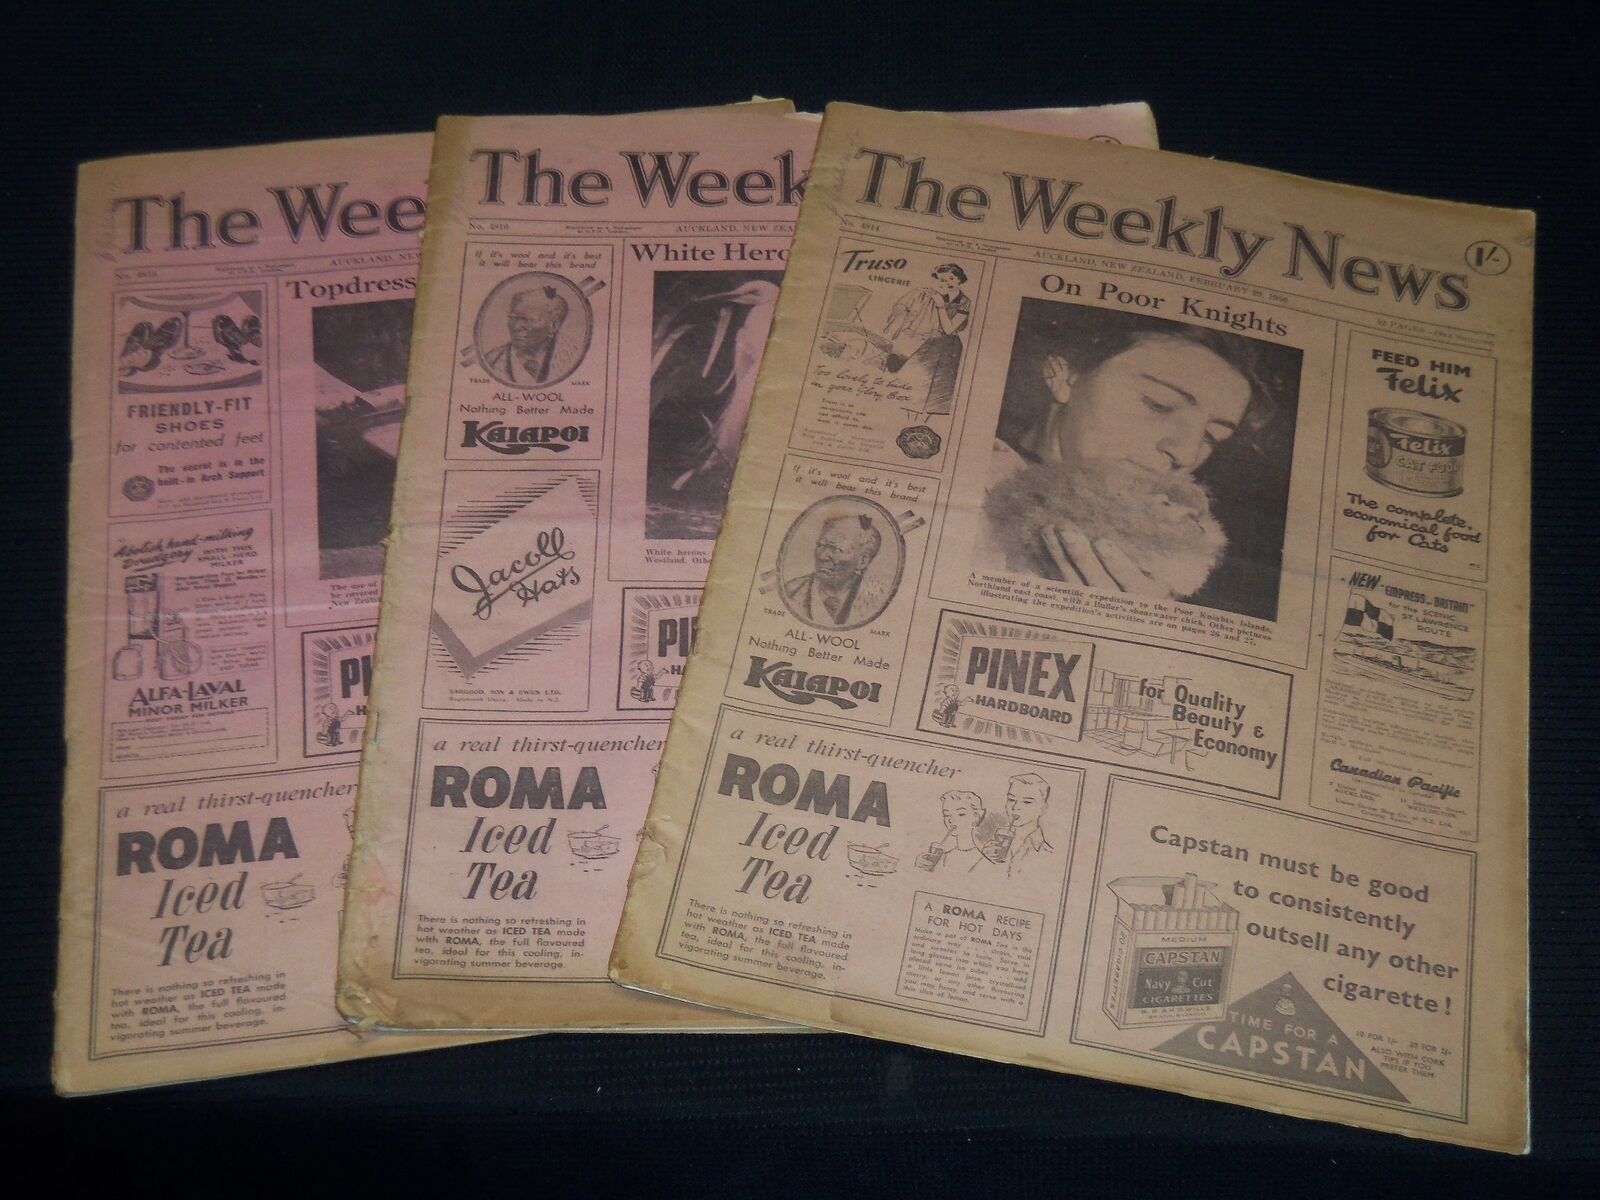 1956 THE WEEKLY NEWS AUCKLAND NEW ZEALAND NEWSPAPER LOT OF 3 ISSUES - NP 1346